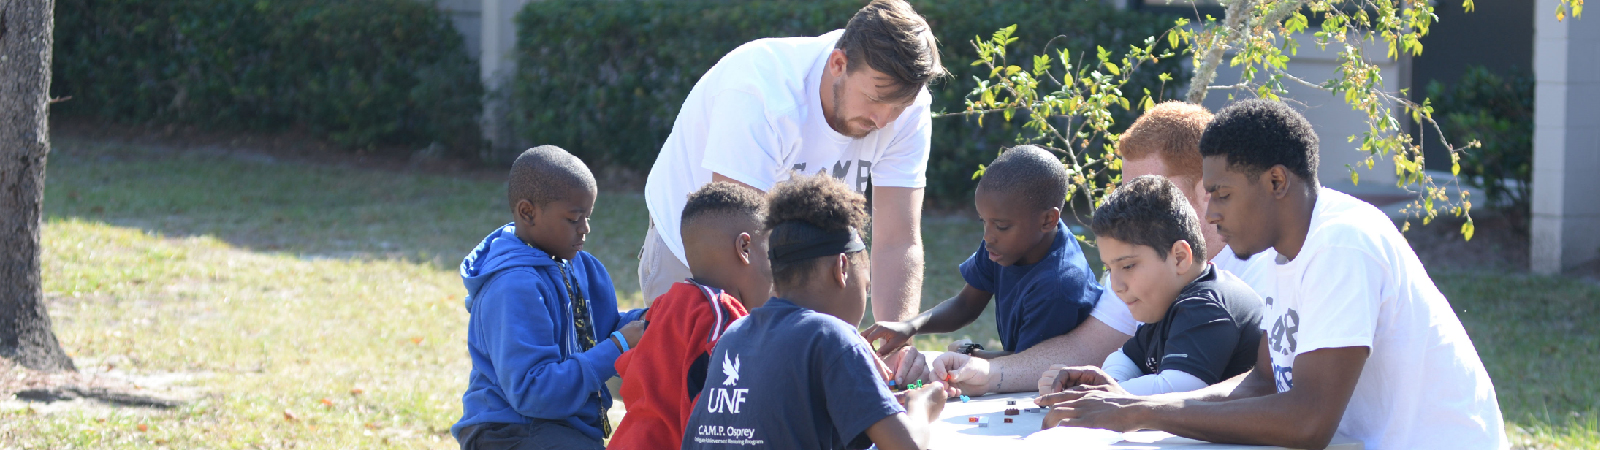 UNF students playing Legos with K12 students at an outside table